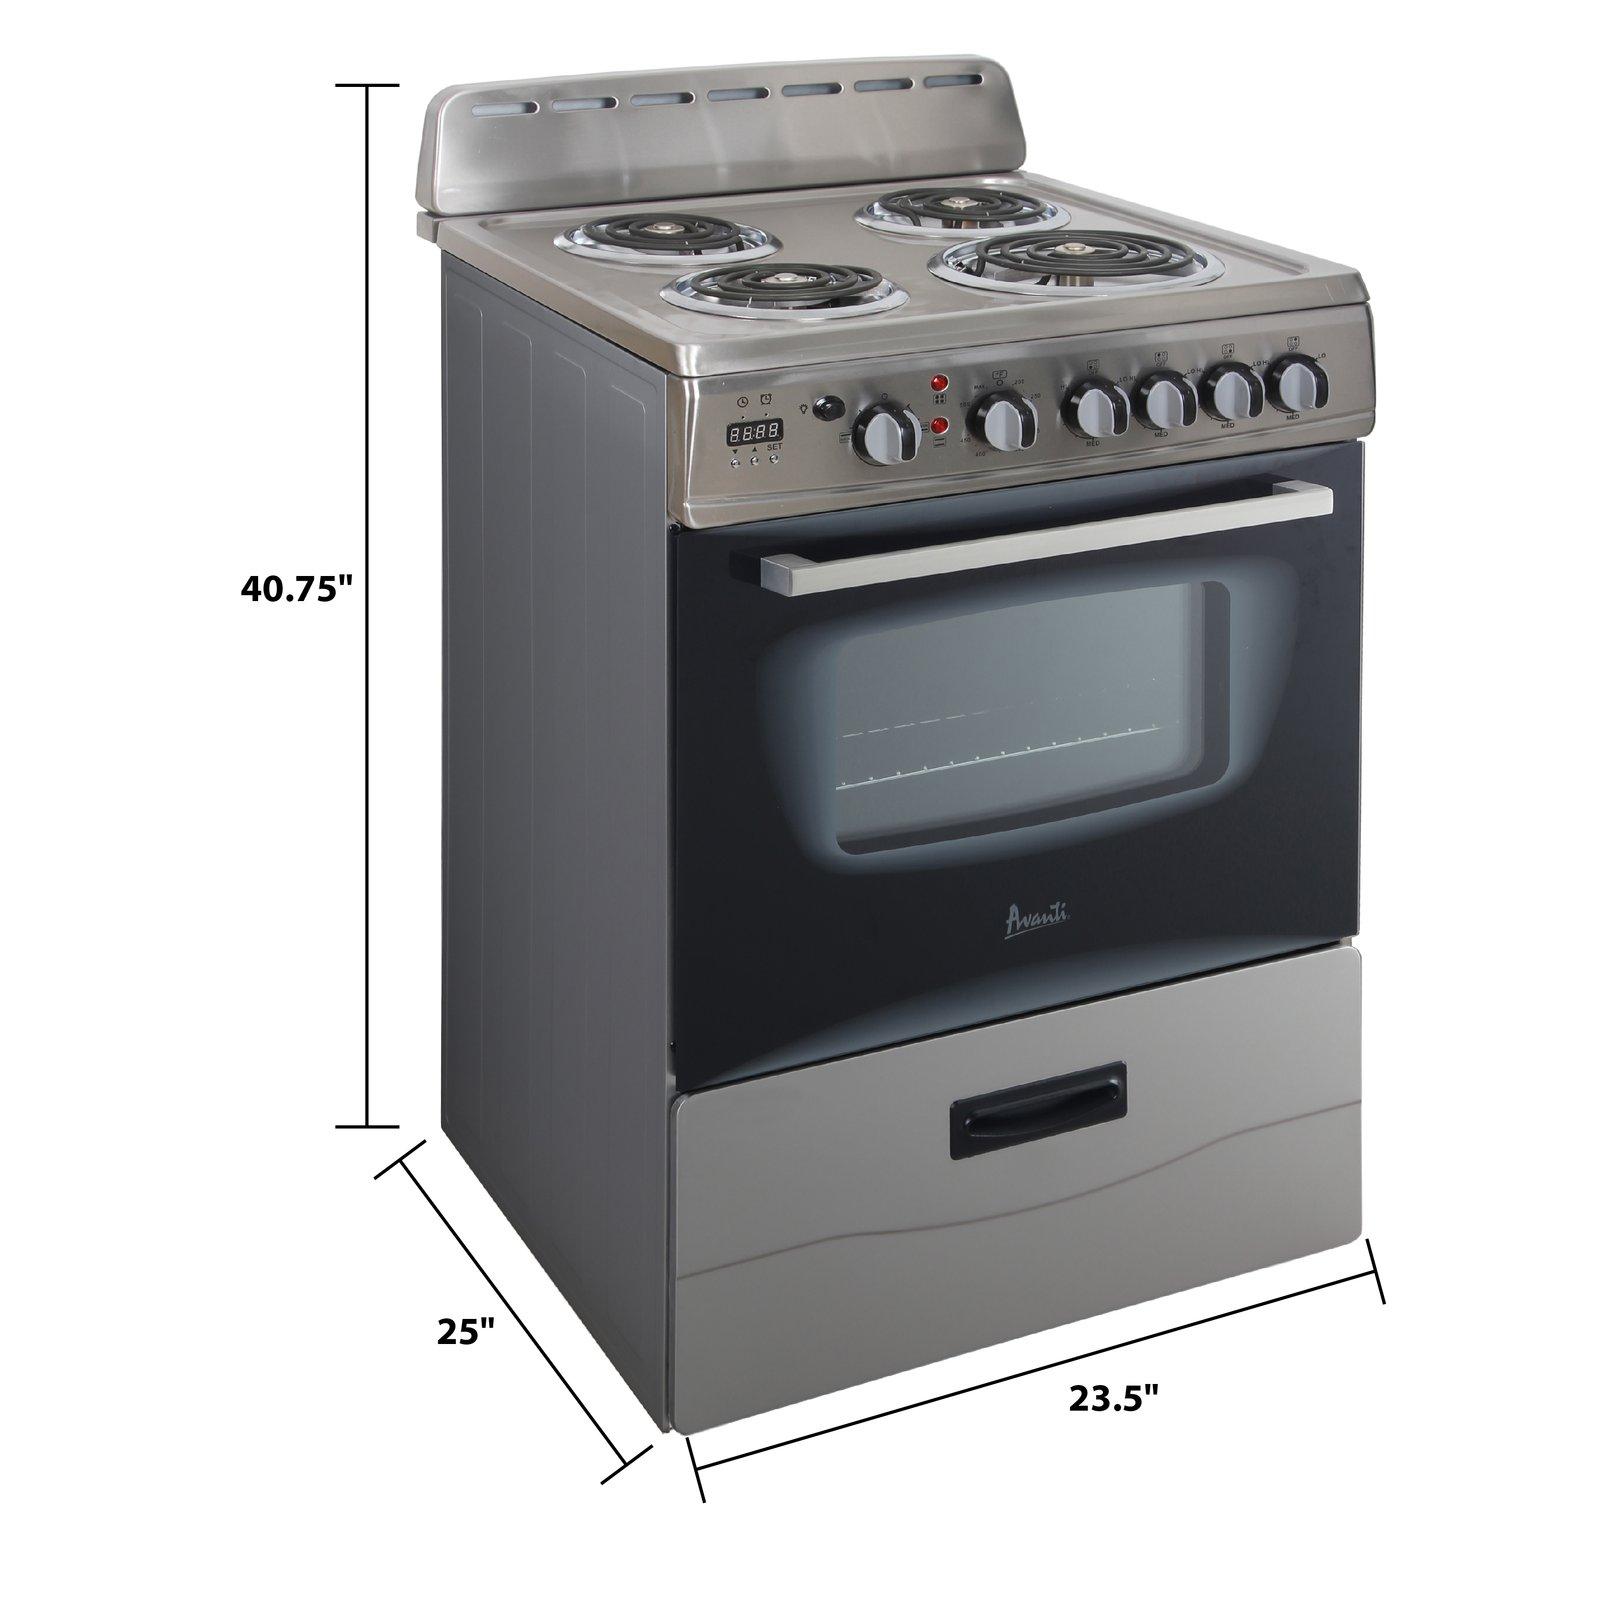 Avanti 24" Electric Range Oven with Framed Glass Door - Stainless Steel / 2.6 cu. ft.